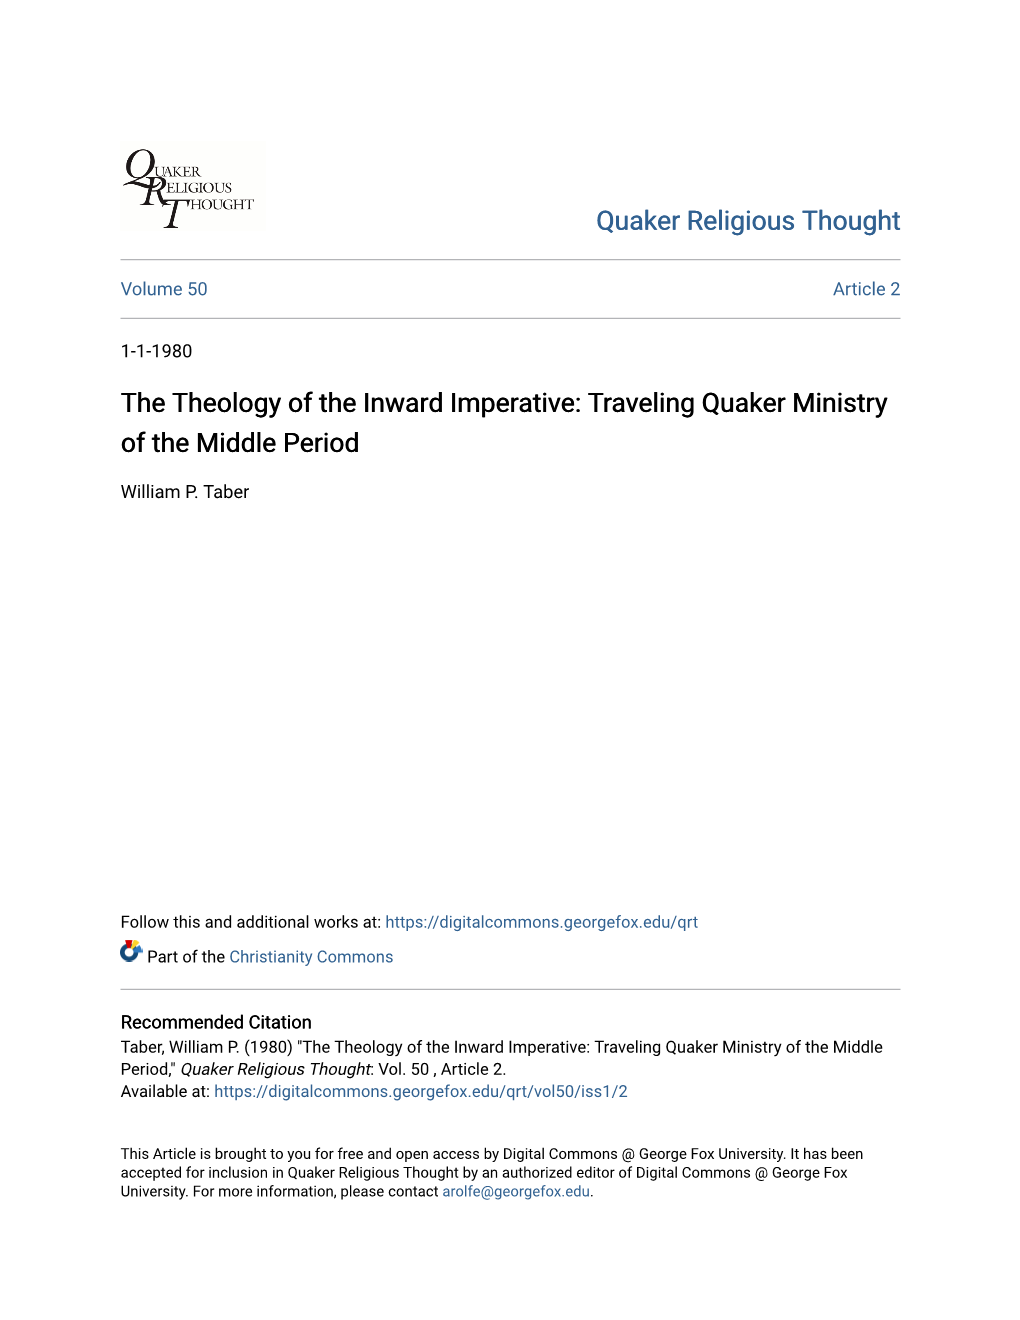 The Theology of the Inward Imperative: Traveling Quaker Ministry of the Middle Period